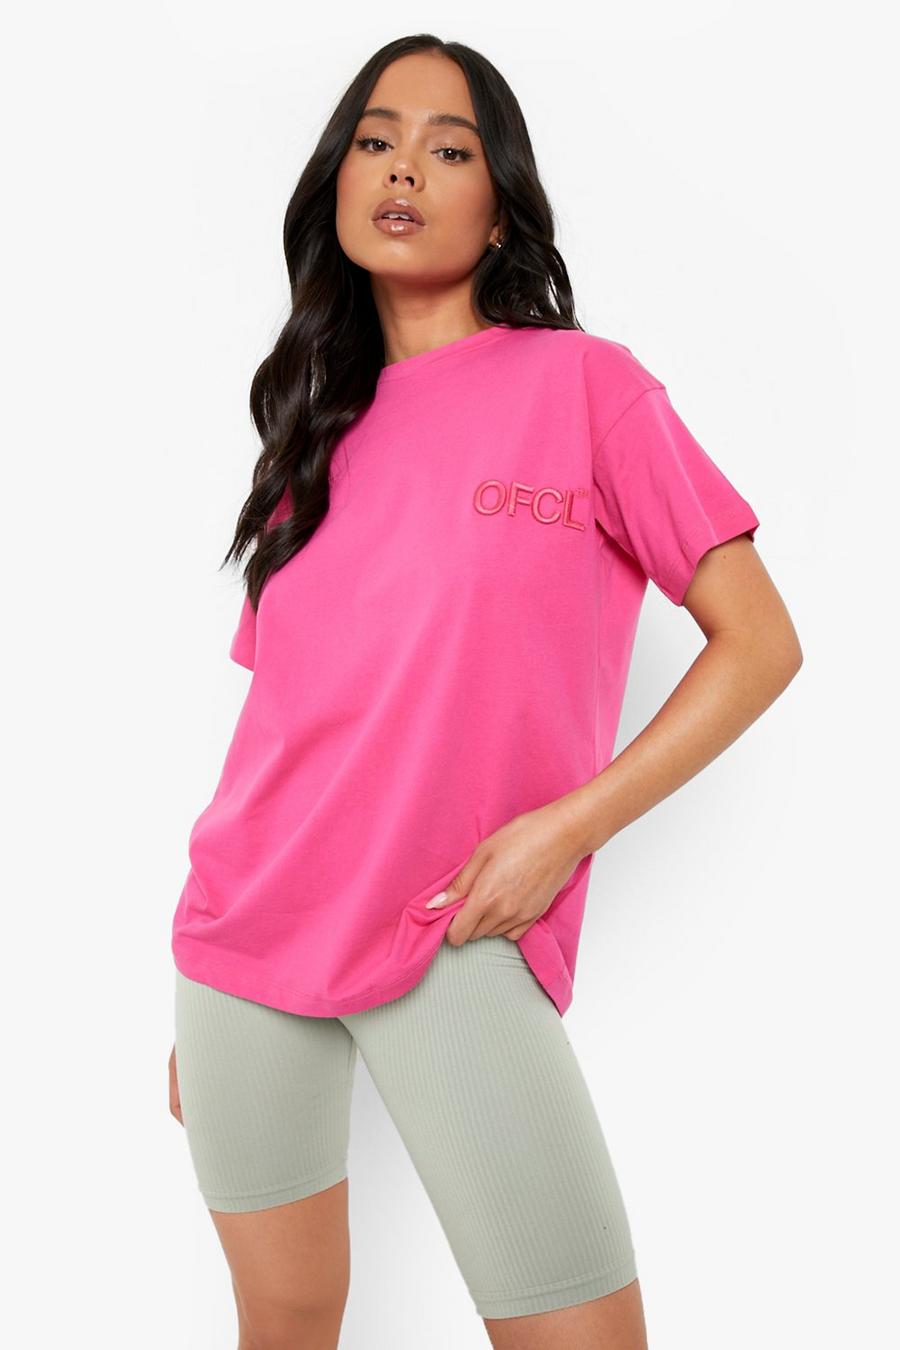 Petite - T-shirt avec broderie - Ofcl, Hot pink rose image number 1